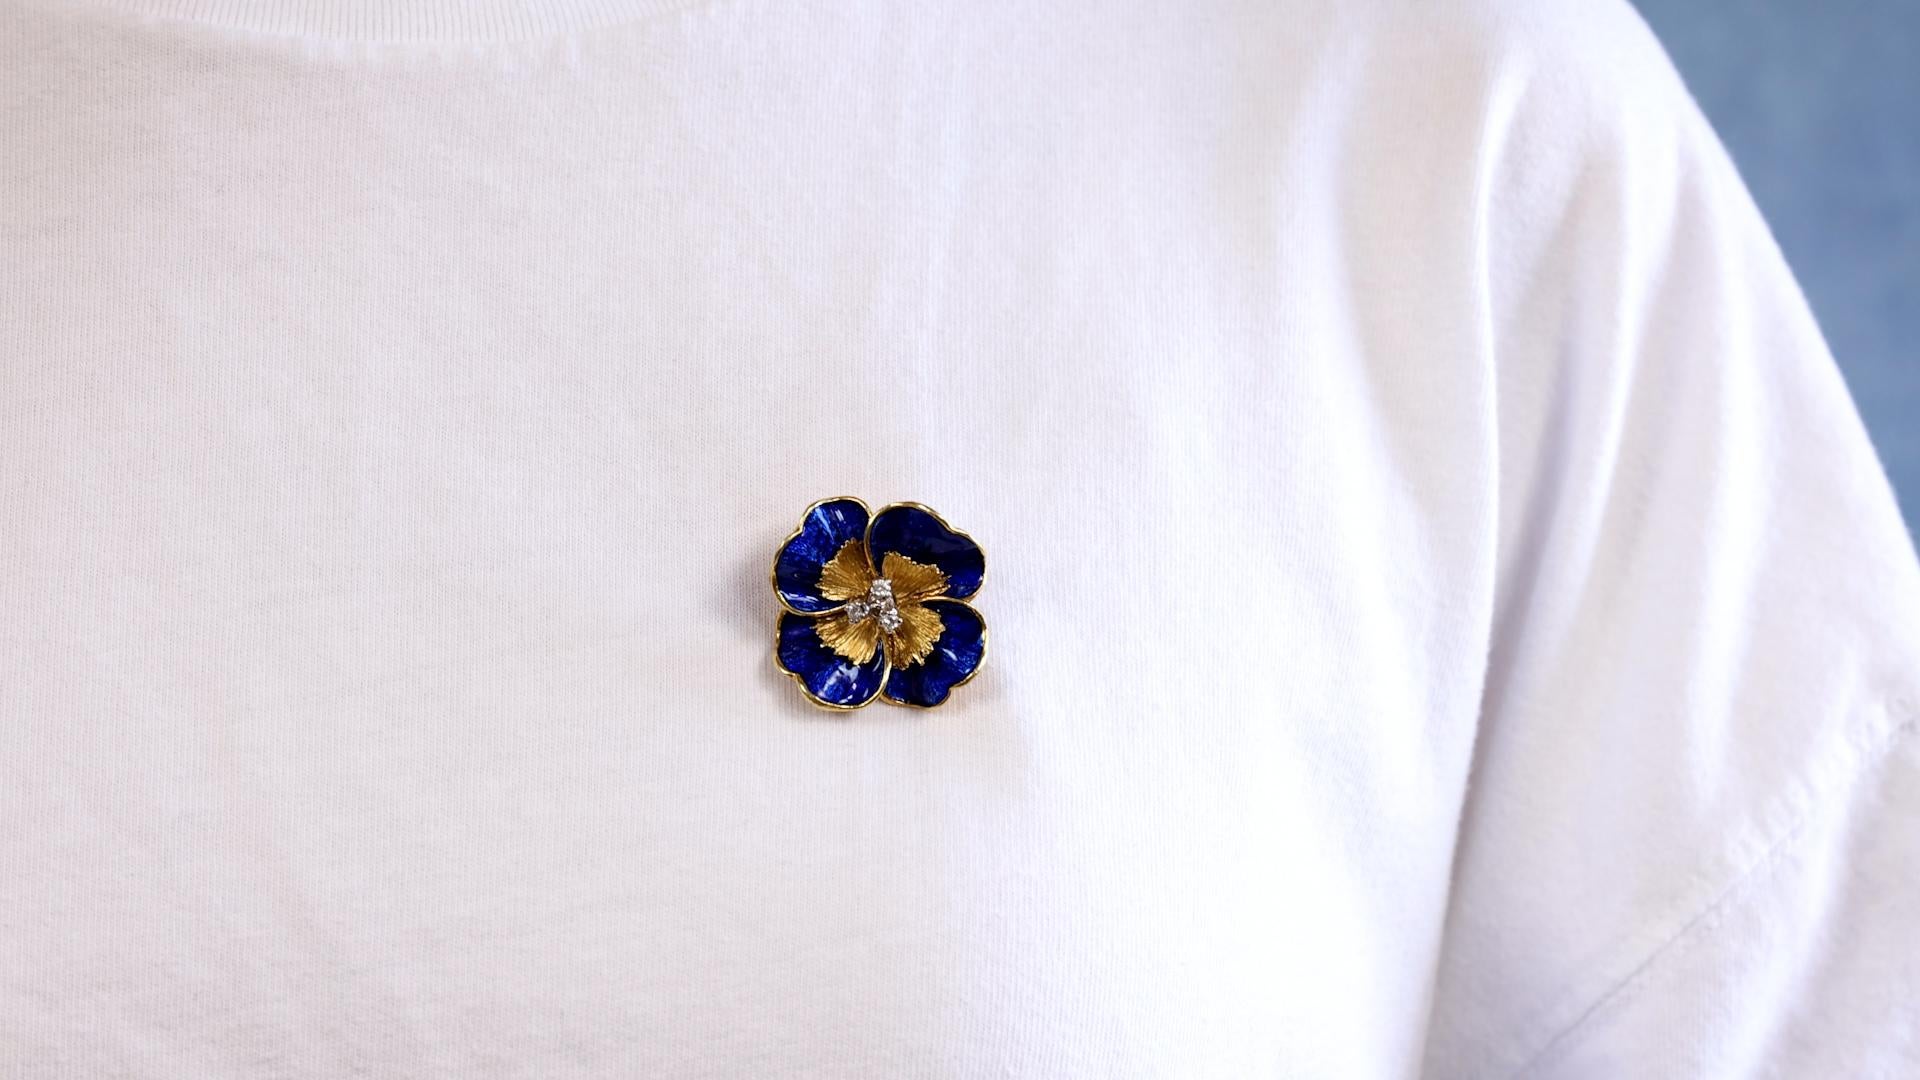 One Vintage Tiffany & Co. Diamond Enamel 18k Yellow Gold Pansy Brooch. Featuring three round brilliant cut diamonds with a total weight of approximately 0.20 carat, graded F color, VS clarity. Crafted in 18 karat yellow gold and blue enamel signed